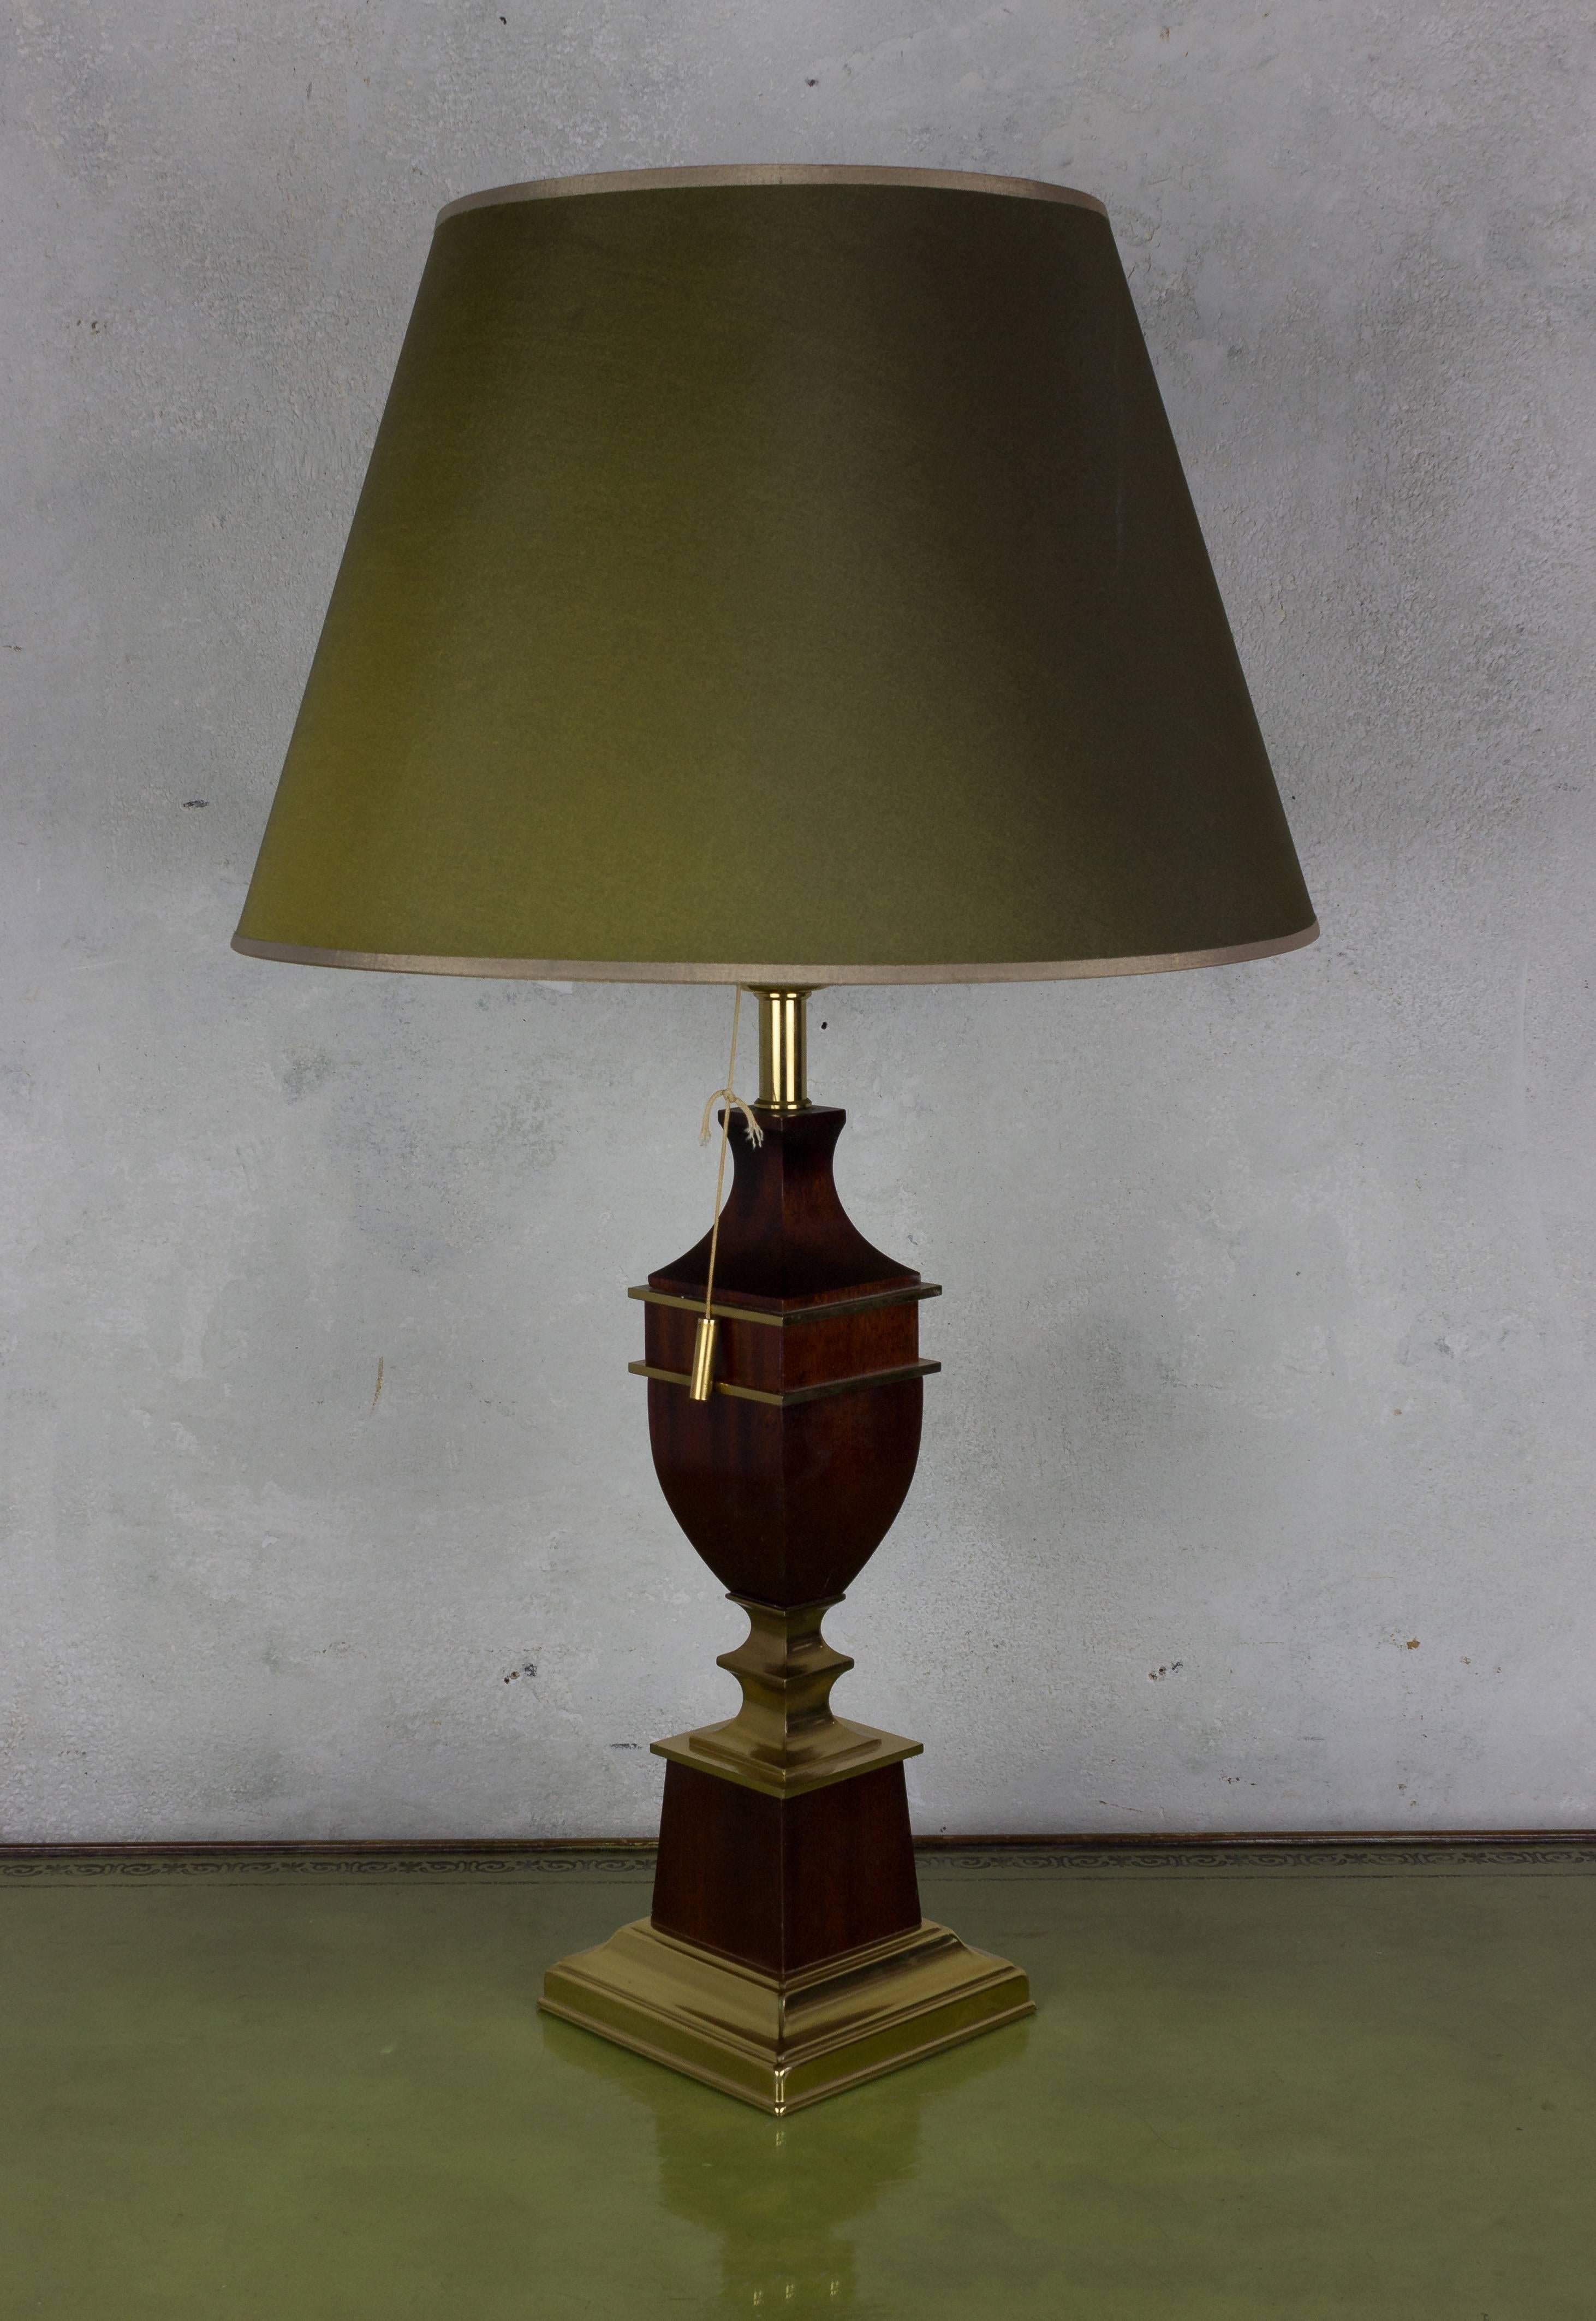 A handsome neoclassical style table lamp in the form of an urn. The lamp is made of mahogany wood with brass trim, and mounted on a brass base. The original green shade is European style and does not require a harp. The lamp takes a single light